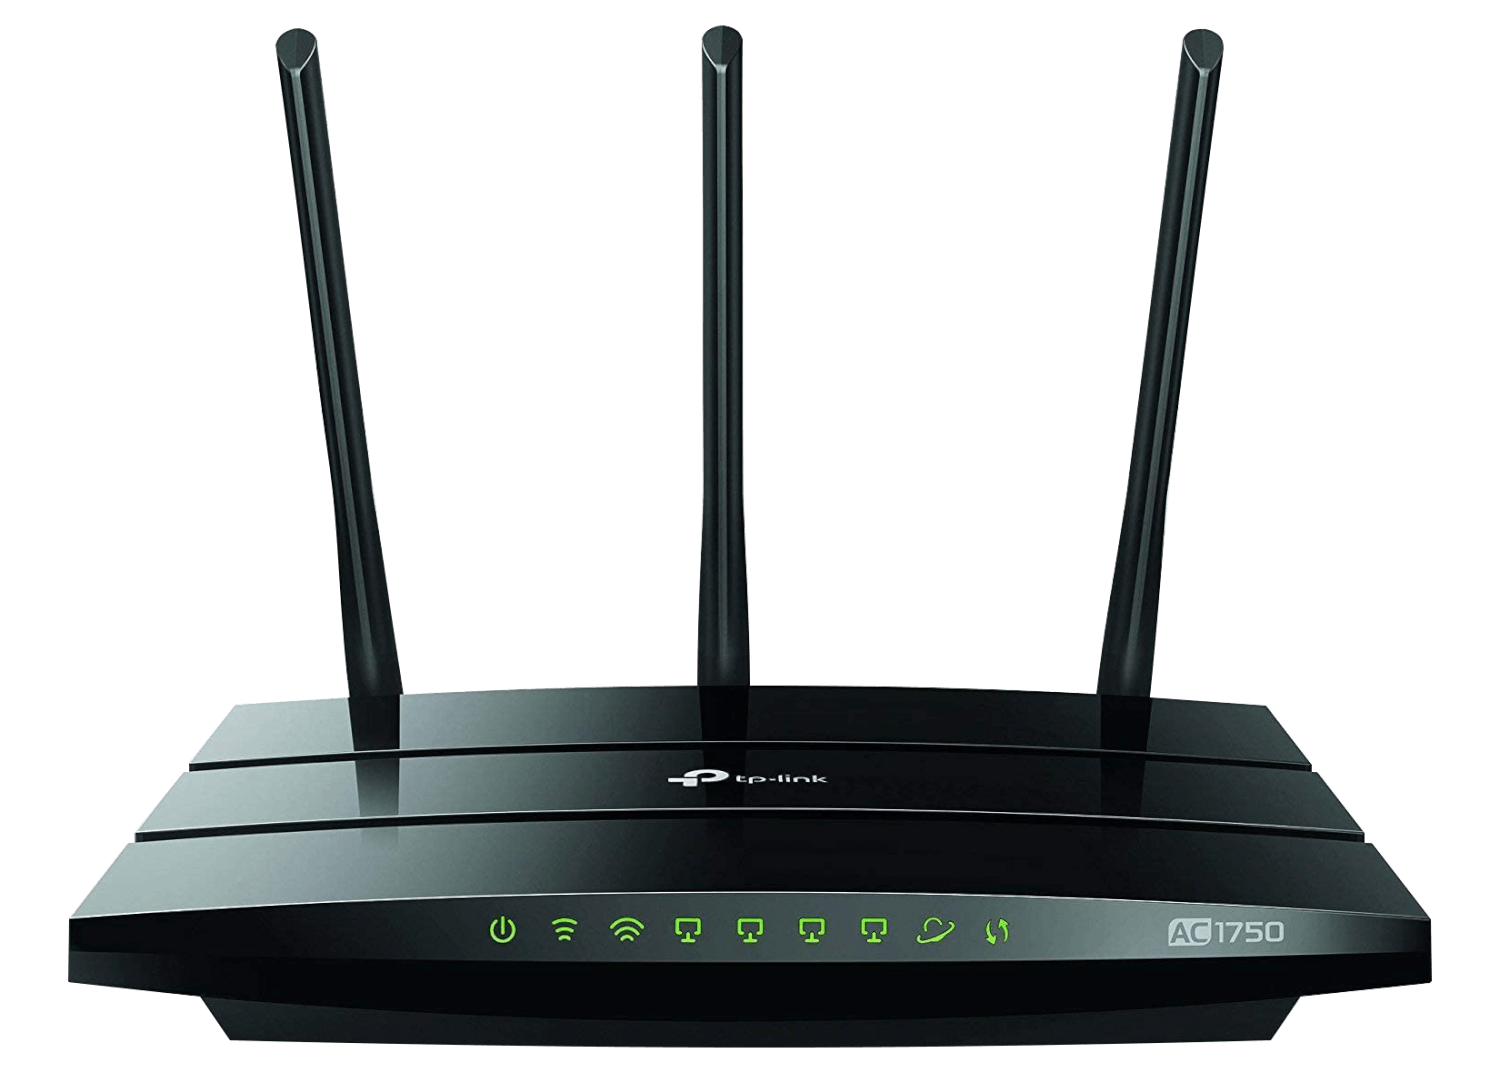 A TP-Link Wi-Fi router that can serve as a base station for a Wi-Fi network